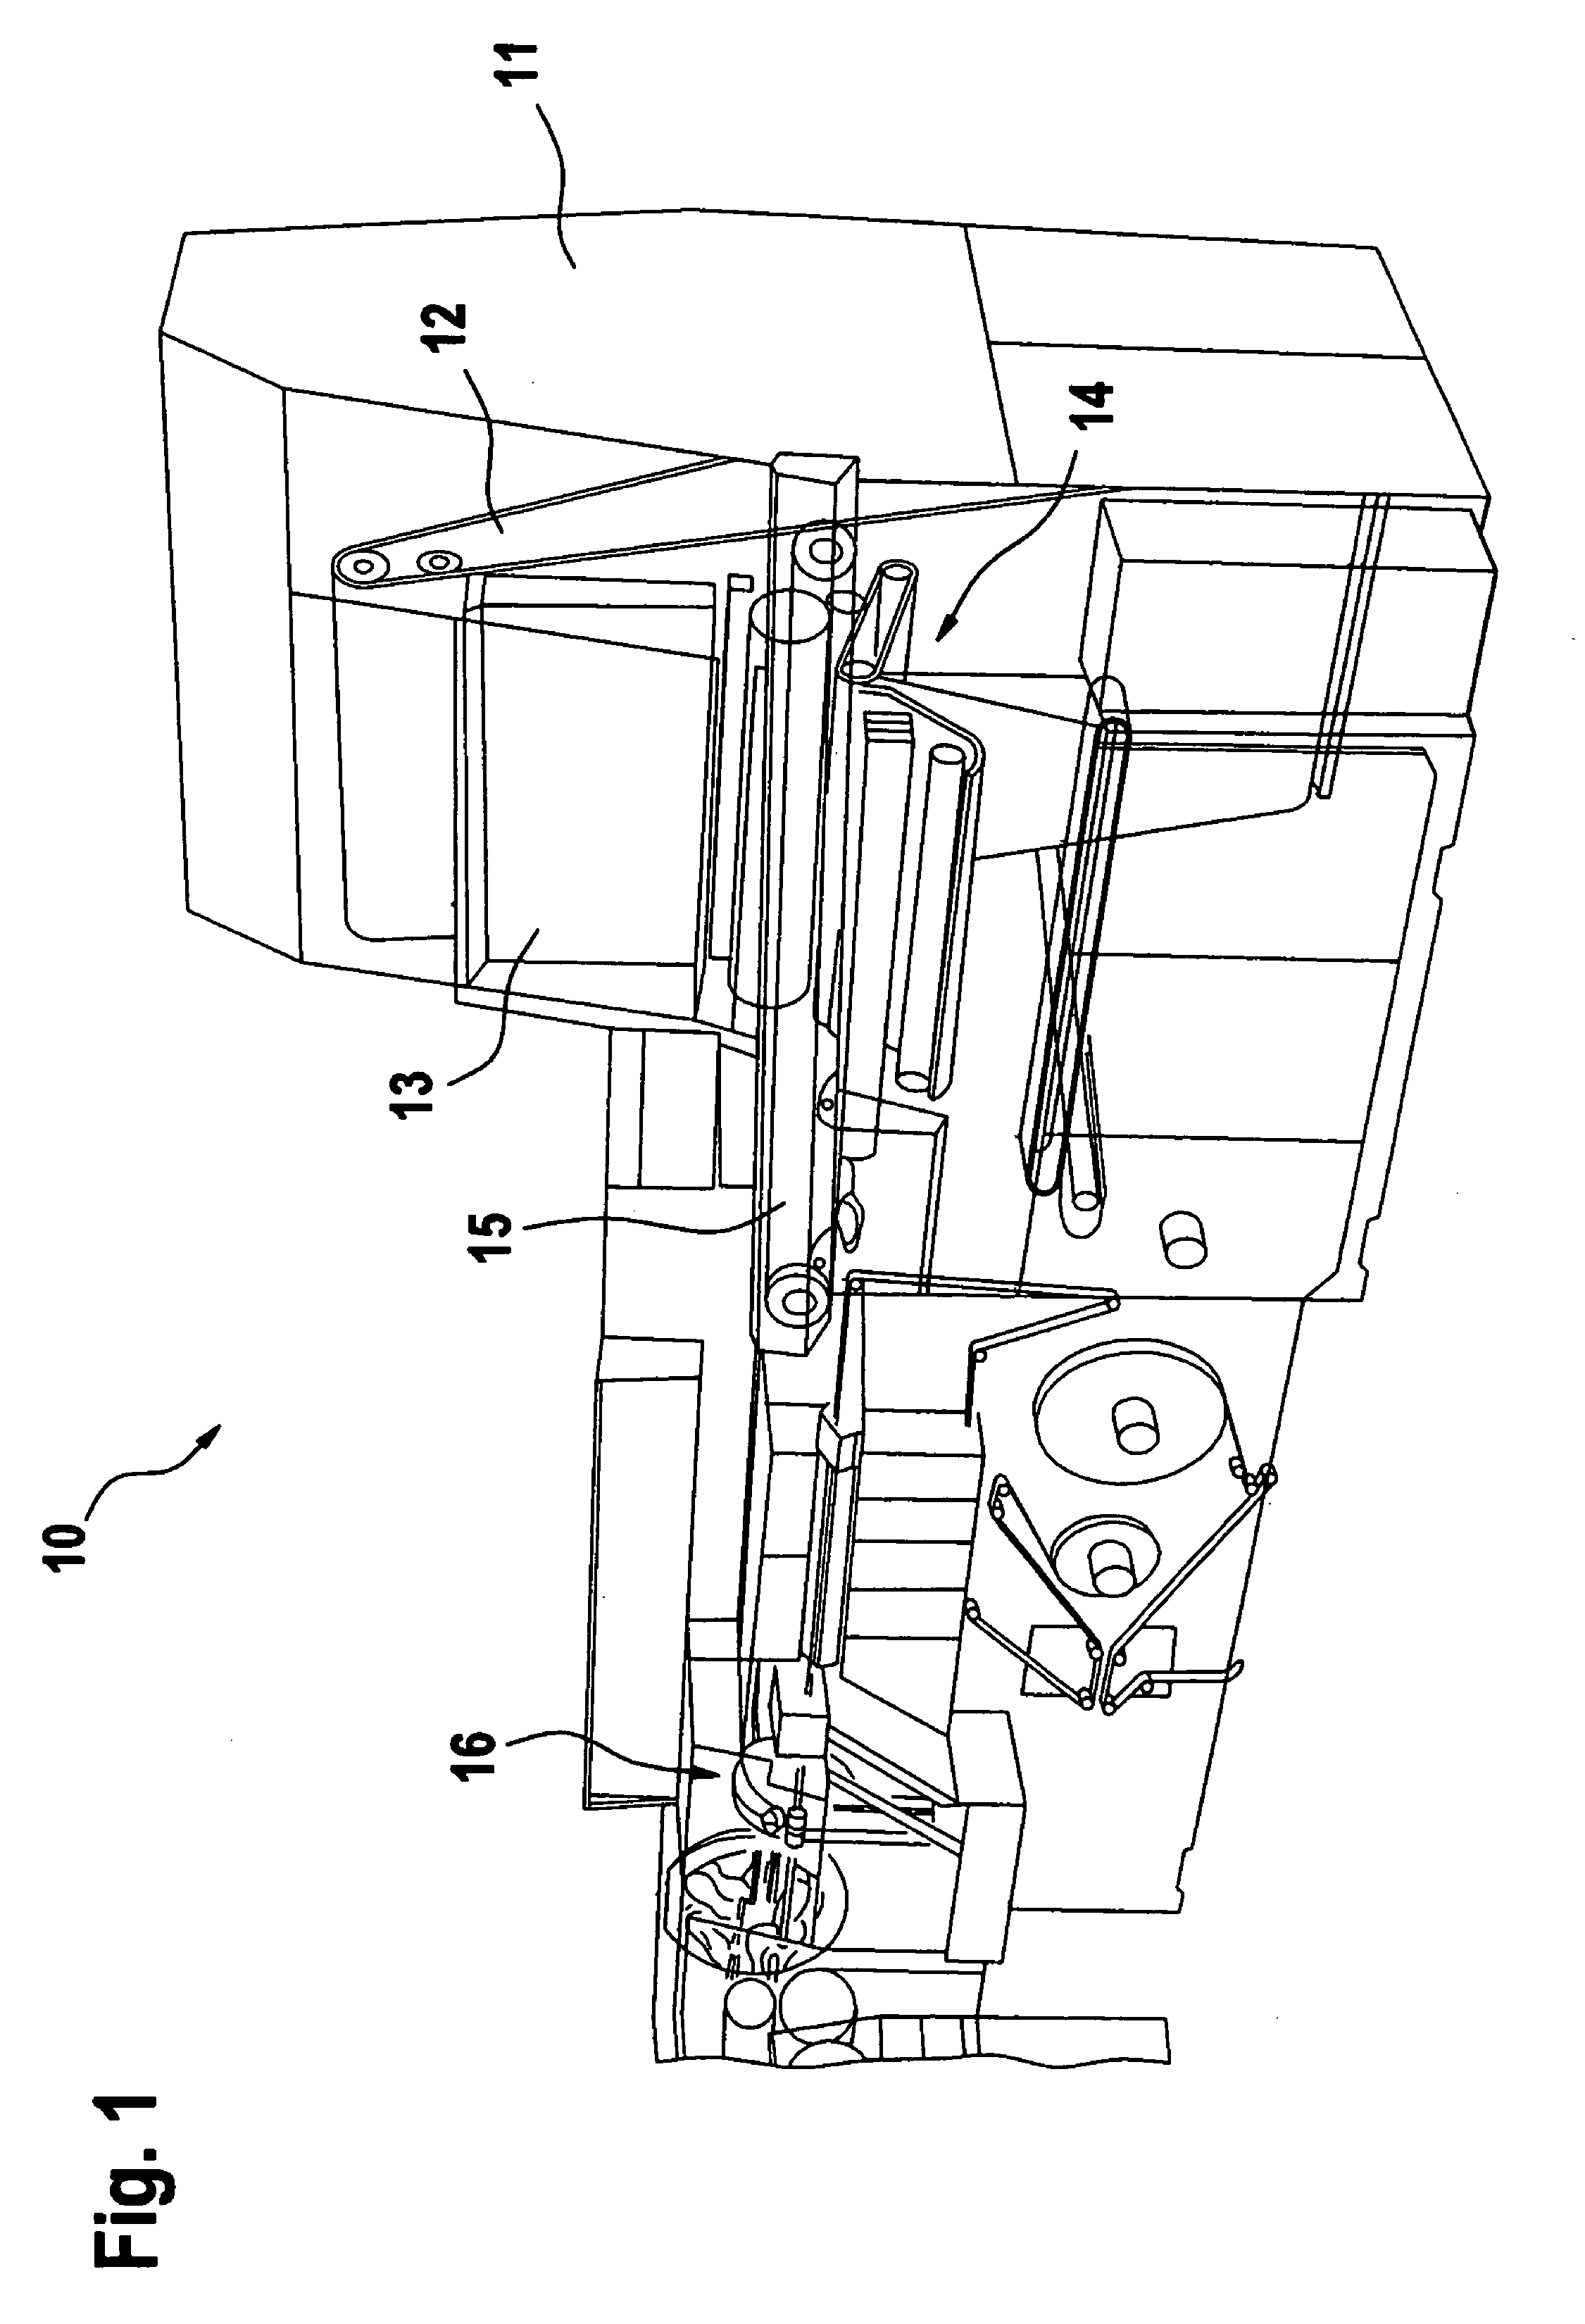 Method and apparatus for cutting a continuously guided rod into rod-shaped articles of variable length